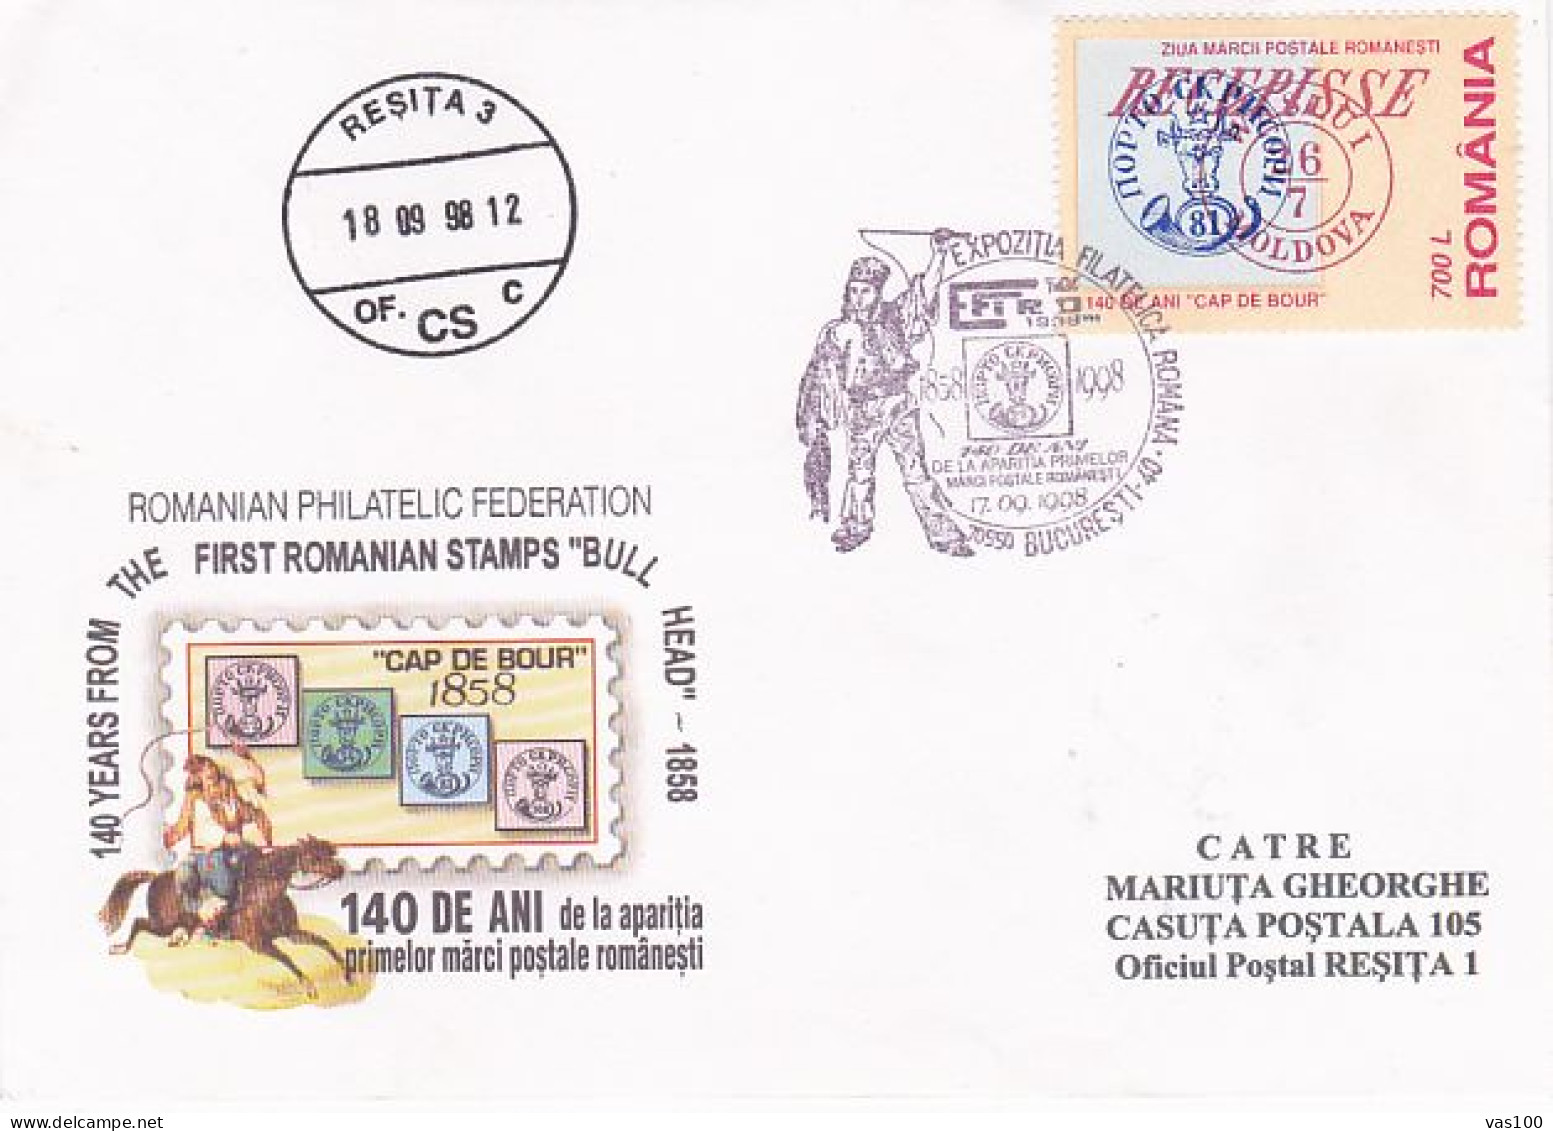 FIRST ROMANIAN STAMP ANNIVERSARY, BULL'S HEAD, OVERPRINT STAMP, SPECIAL COVER, 1998, ROMANIA - Briefe U. Dokumente